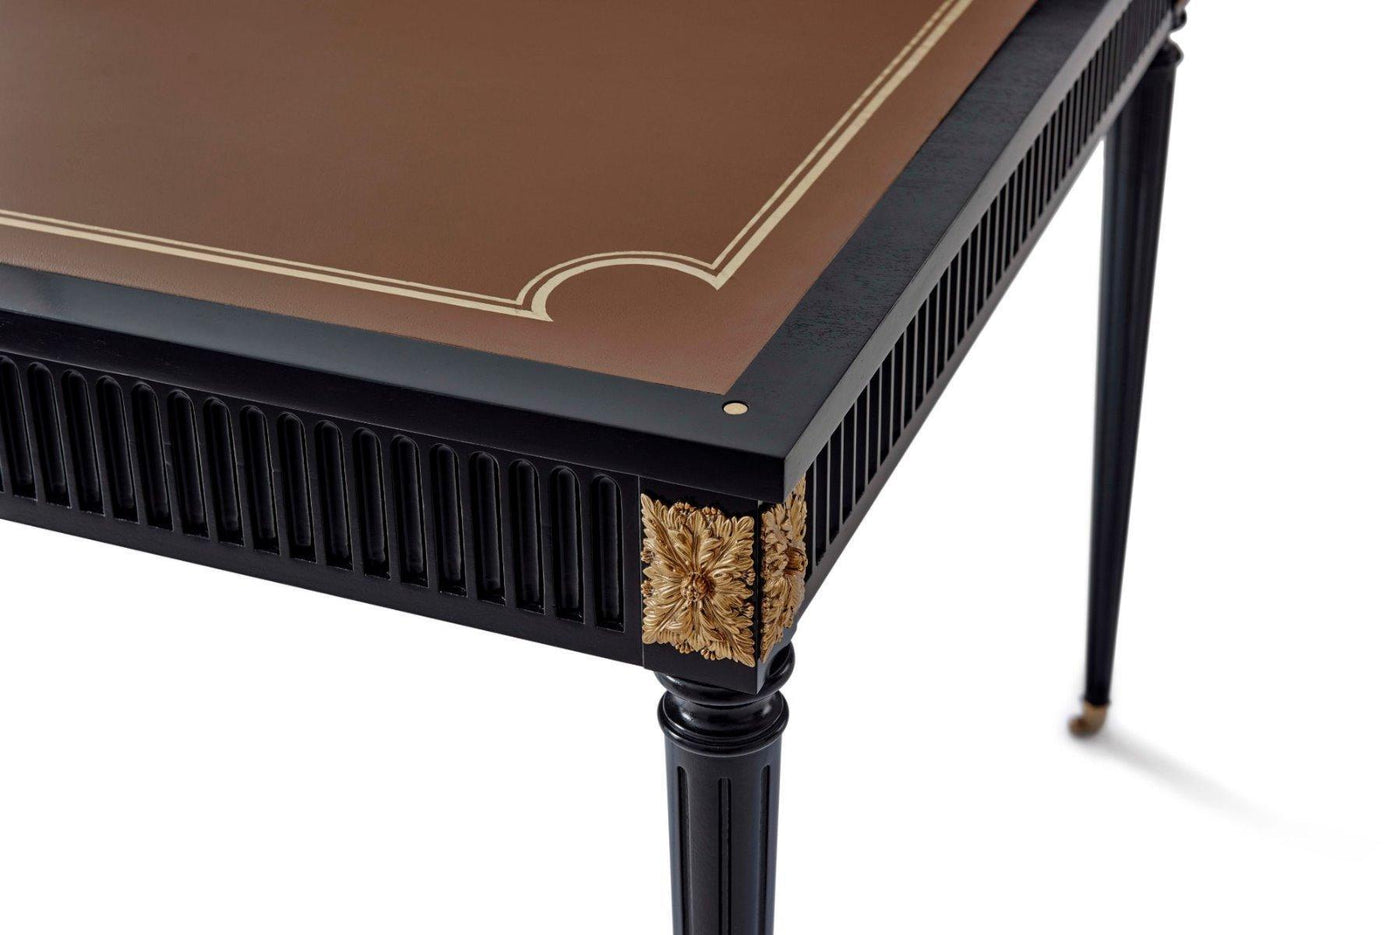 Theodore Alexander Living Games Table Coco House of Isabella UK